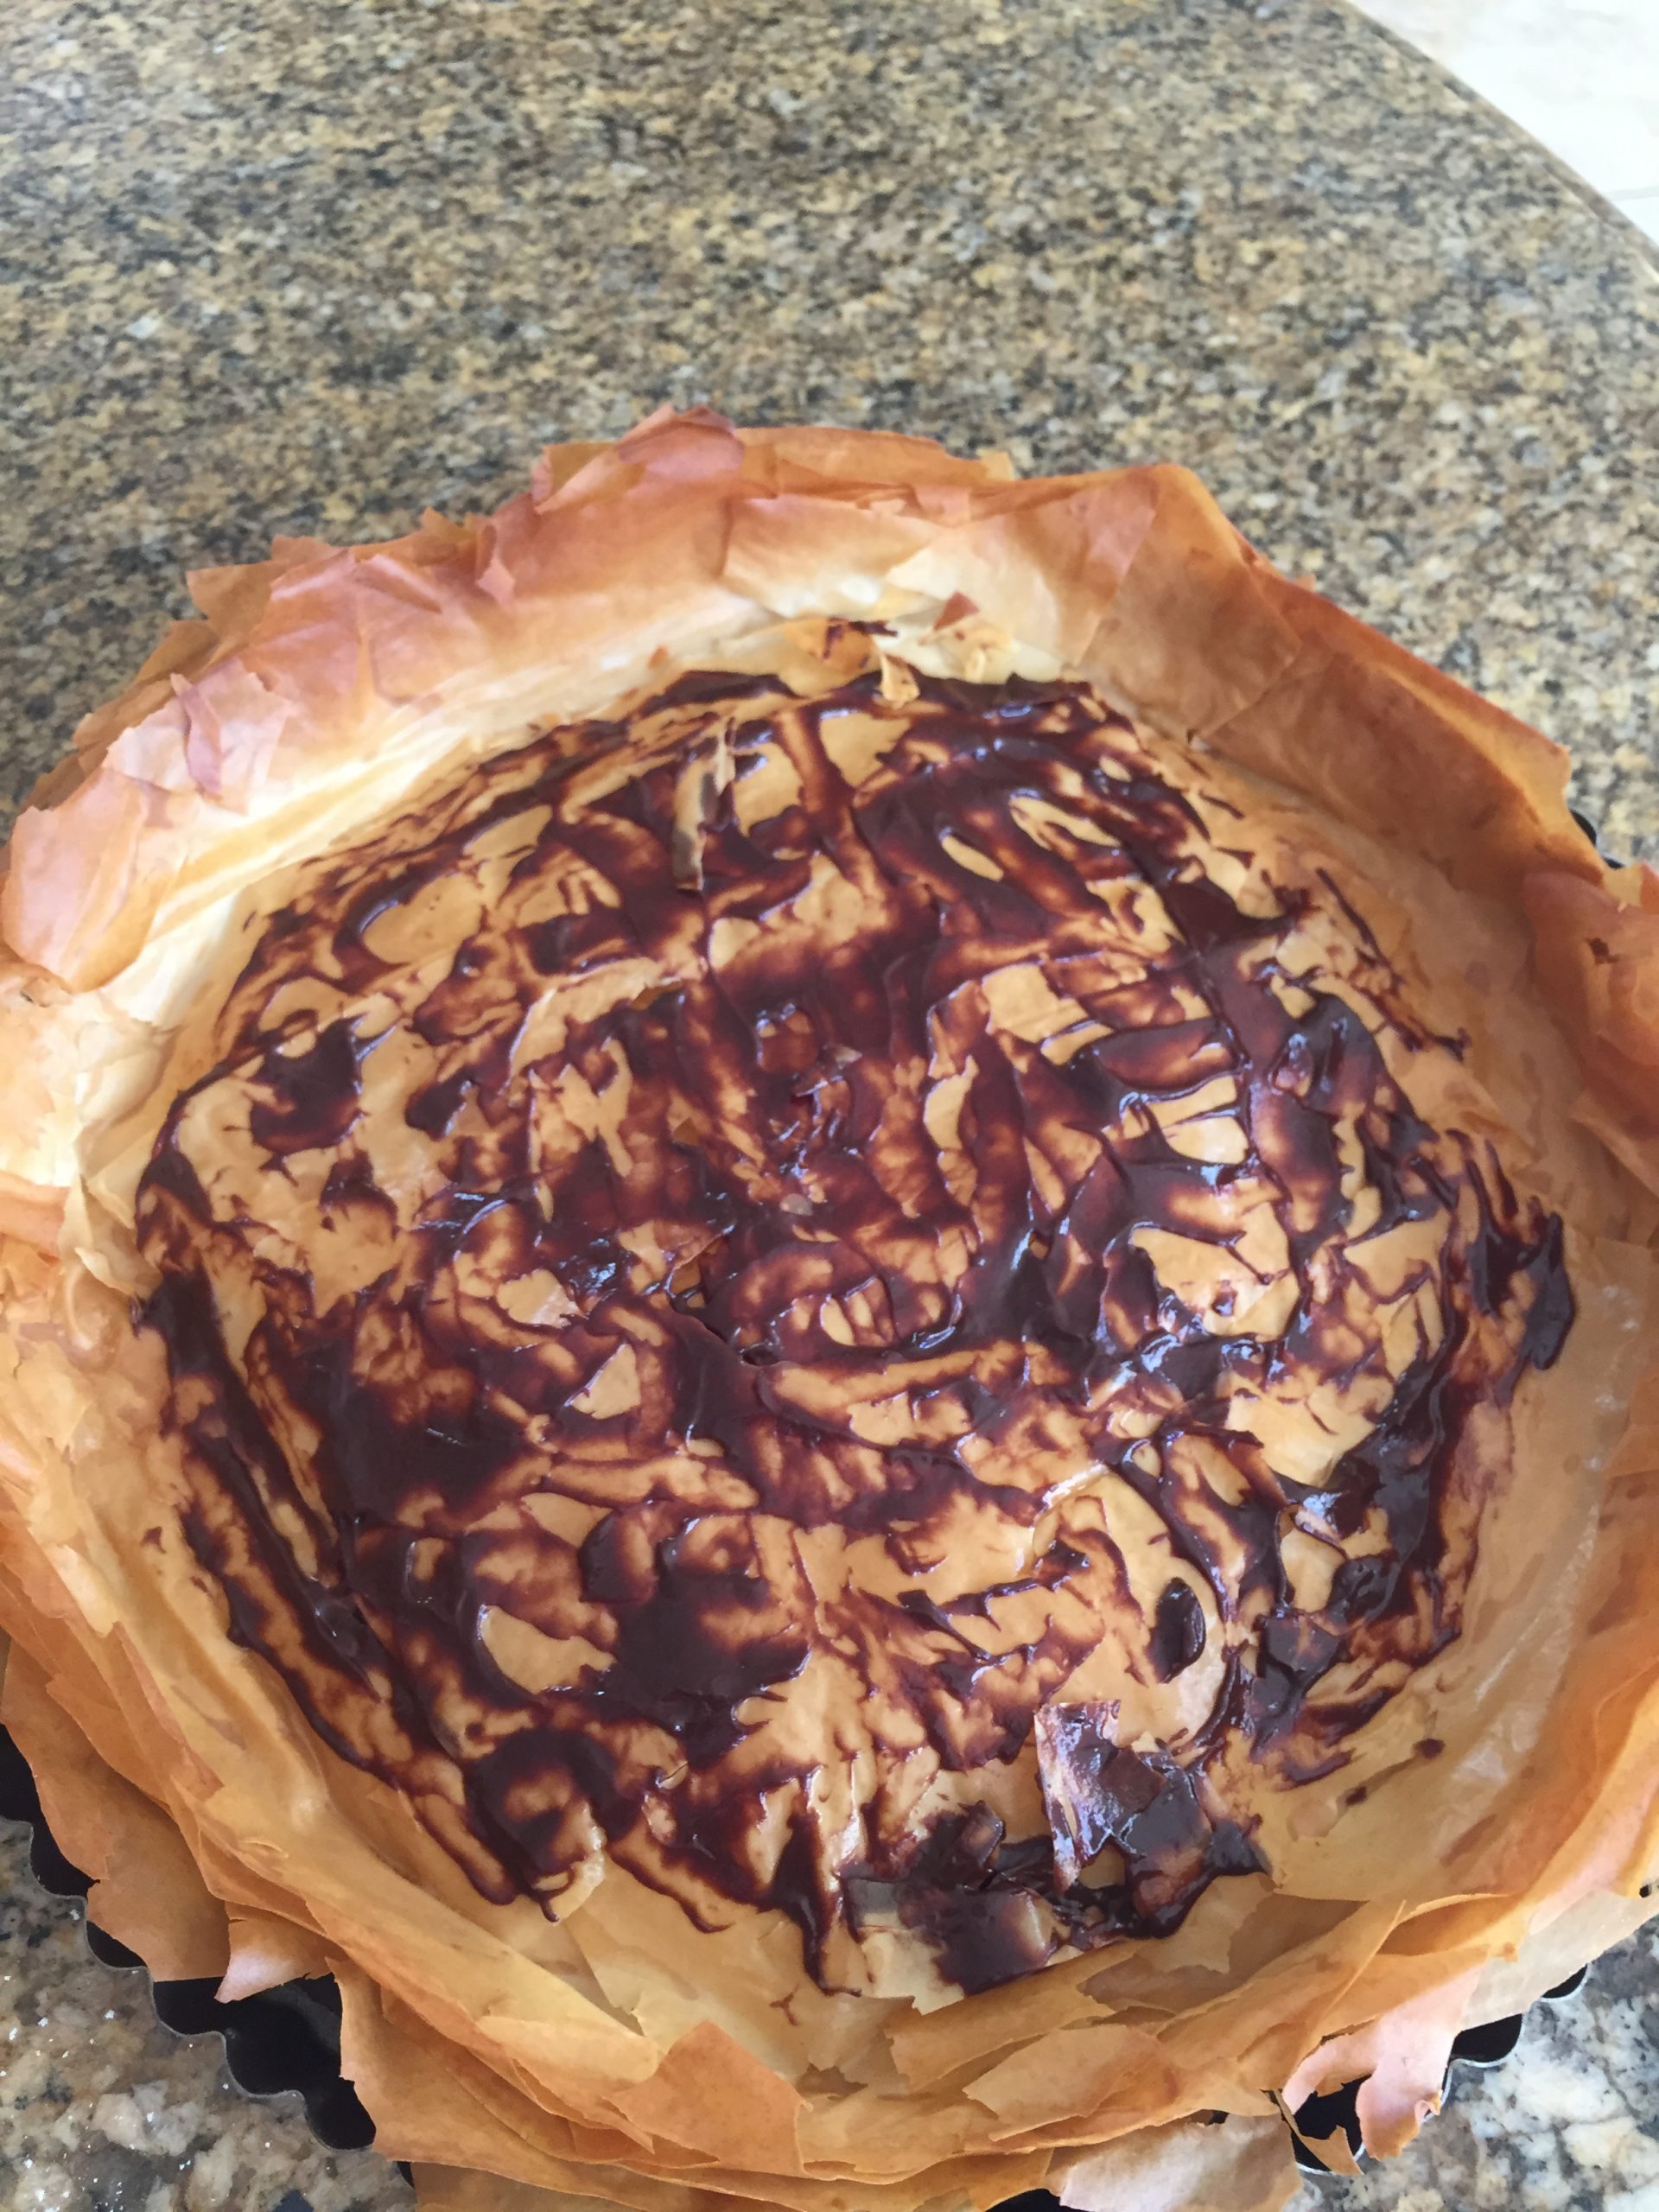 Lightly coated chocolate sauce on phyllo pastry base for tart